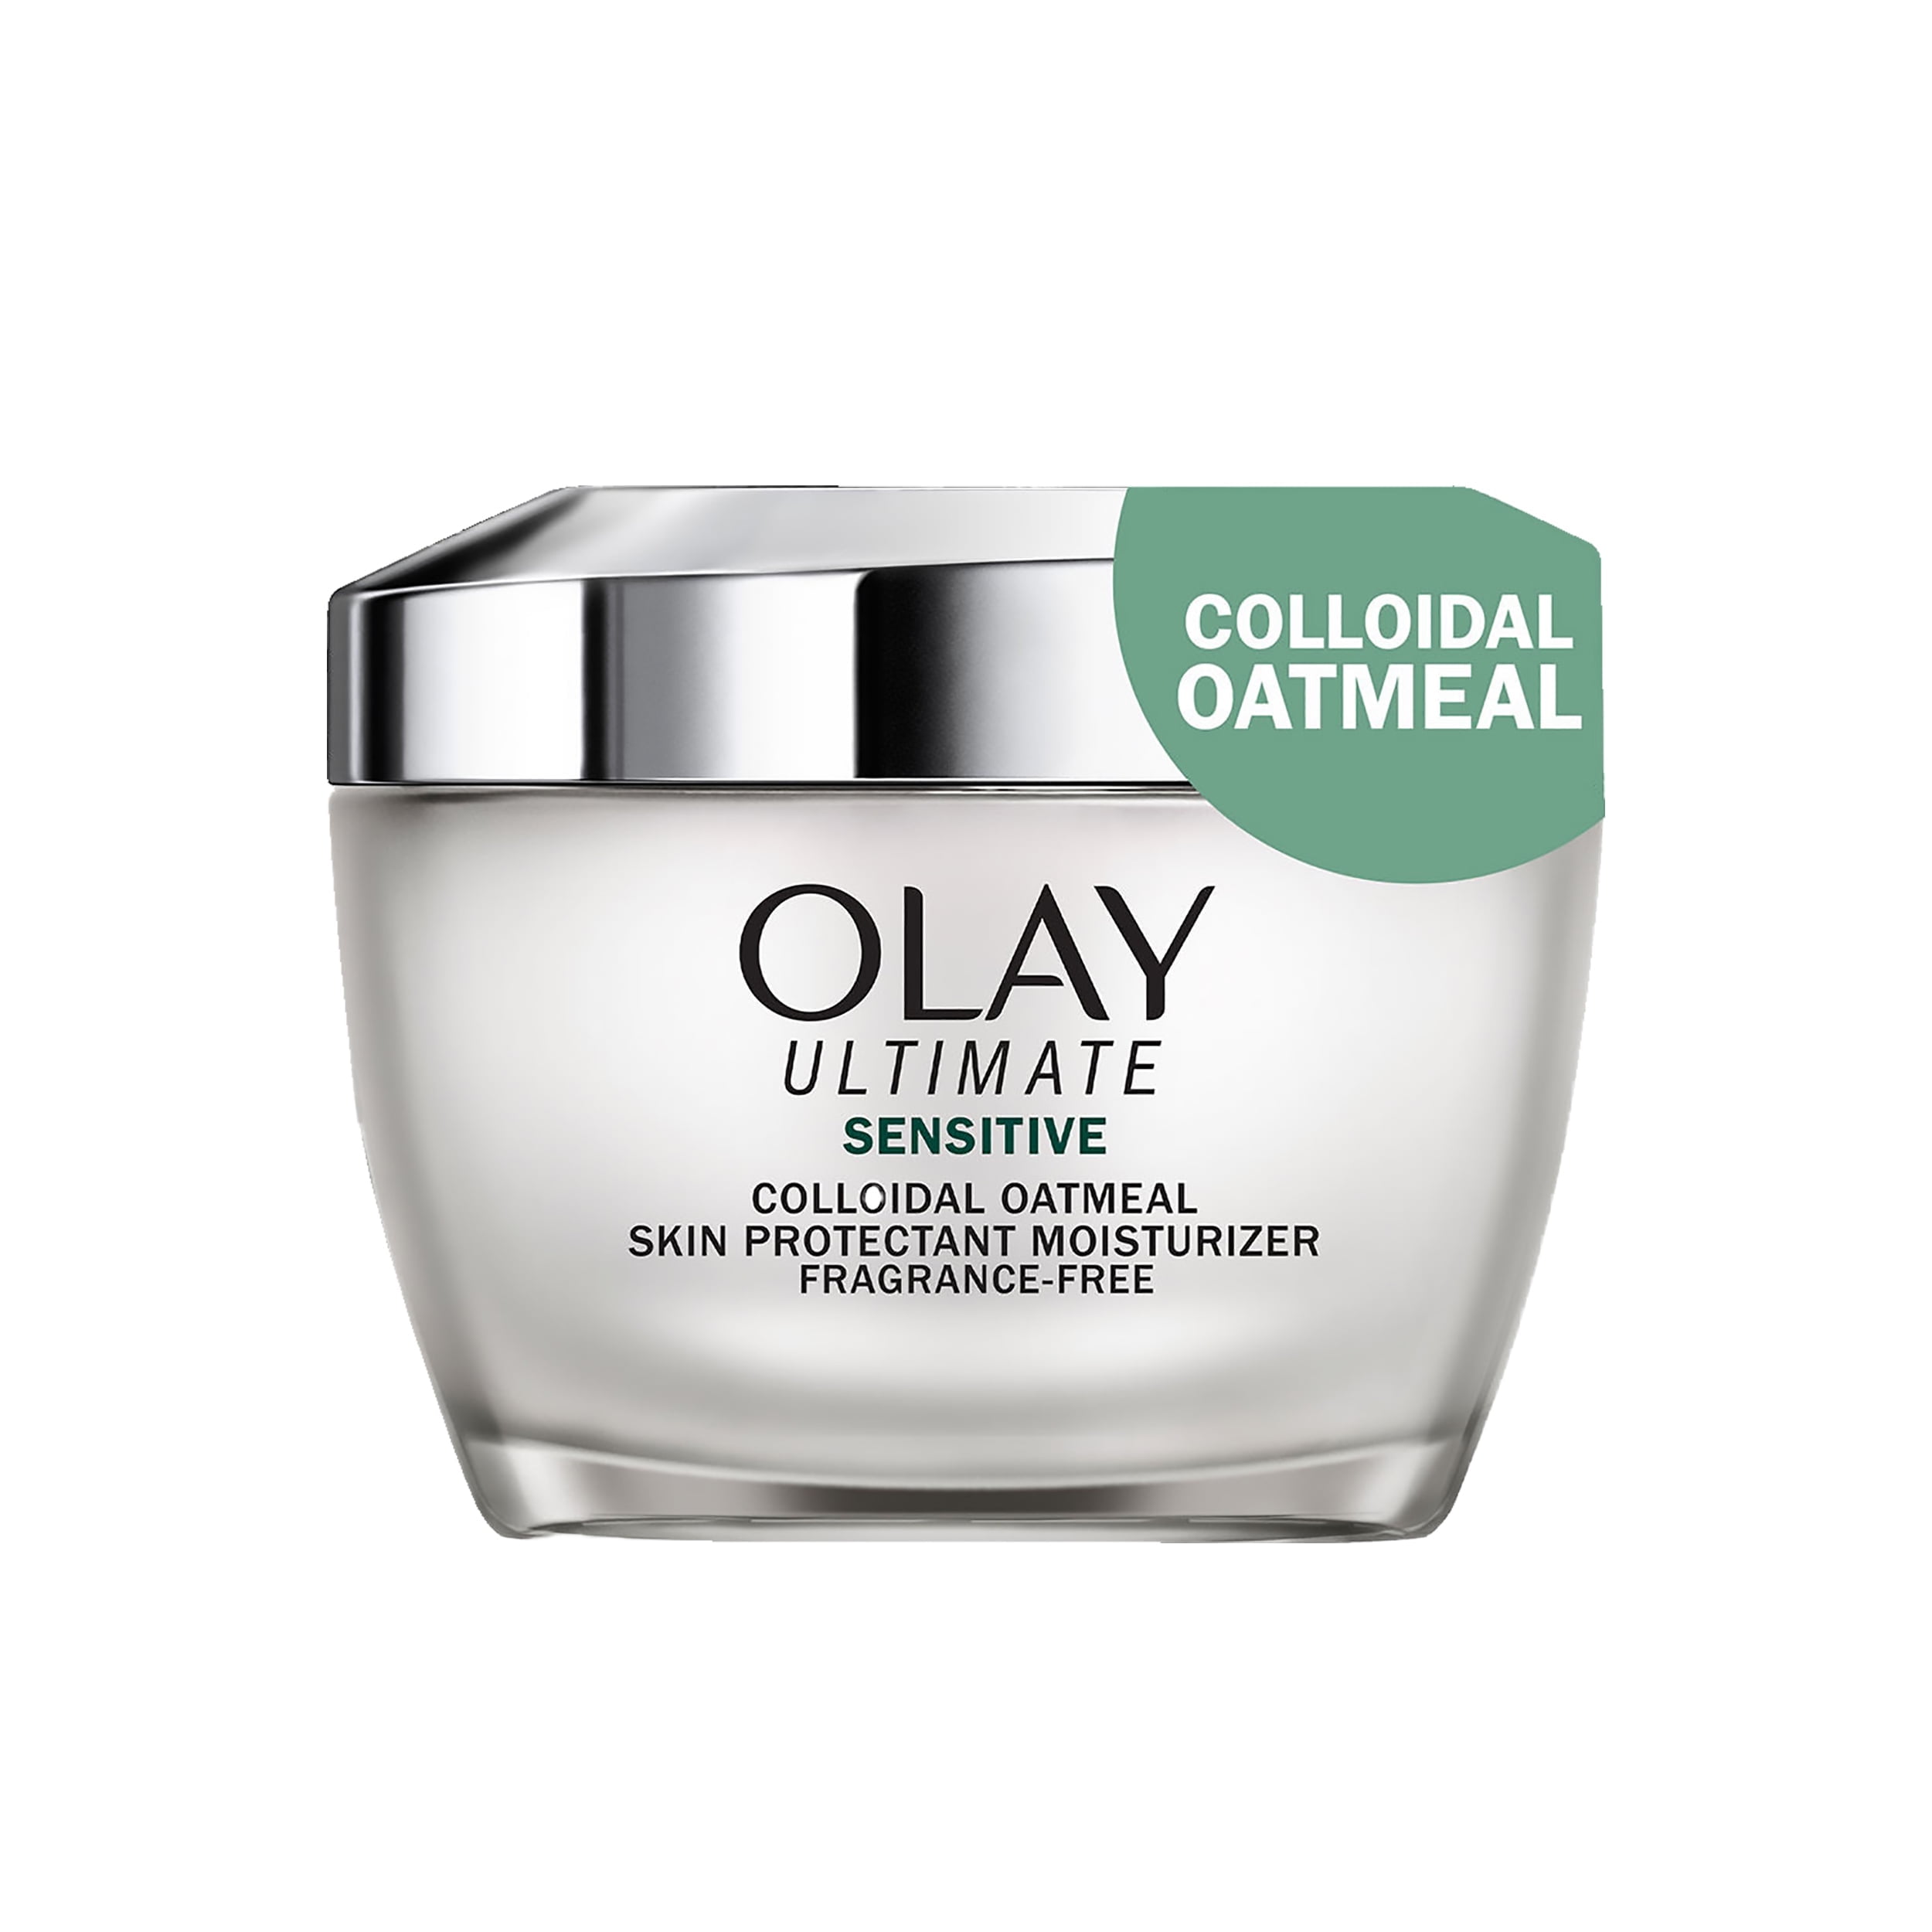 Olay Ultimate Soothing Face Moisturizer for Sensitive Skin, Fragrance-Free (1.7 oz) - image 1 of 5